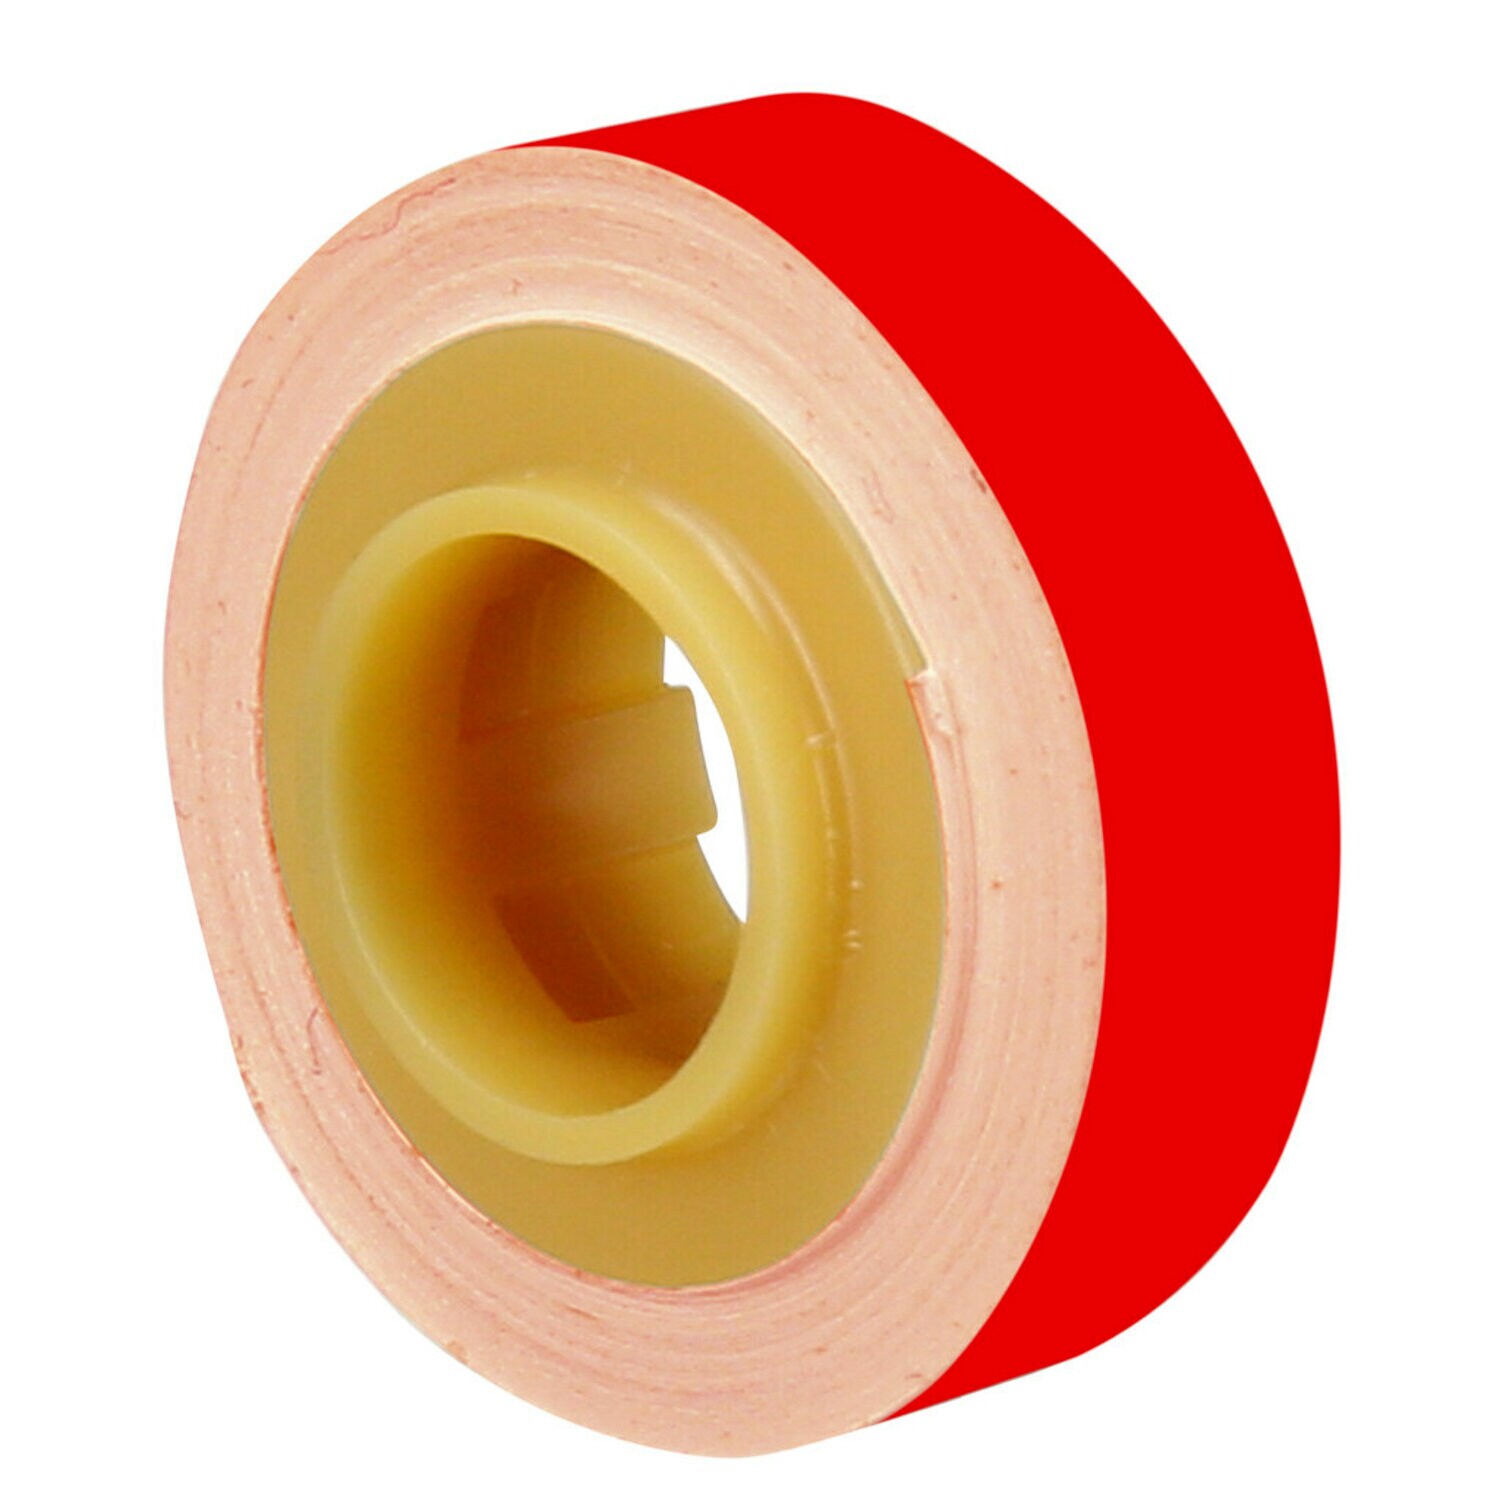 7100017358 - 3M ScotchCode Wire Marker Tape Refill Roll SDR-RD, Red, 50 Rolls/Case